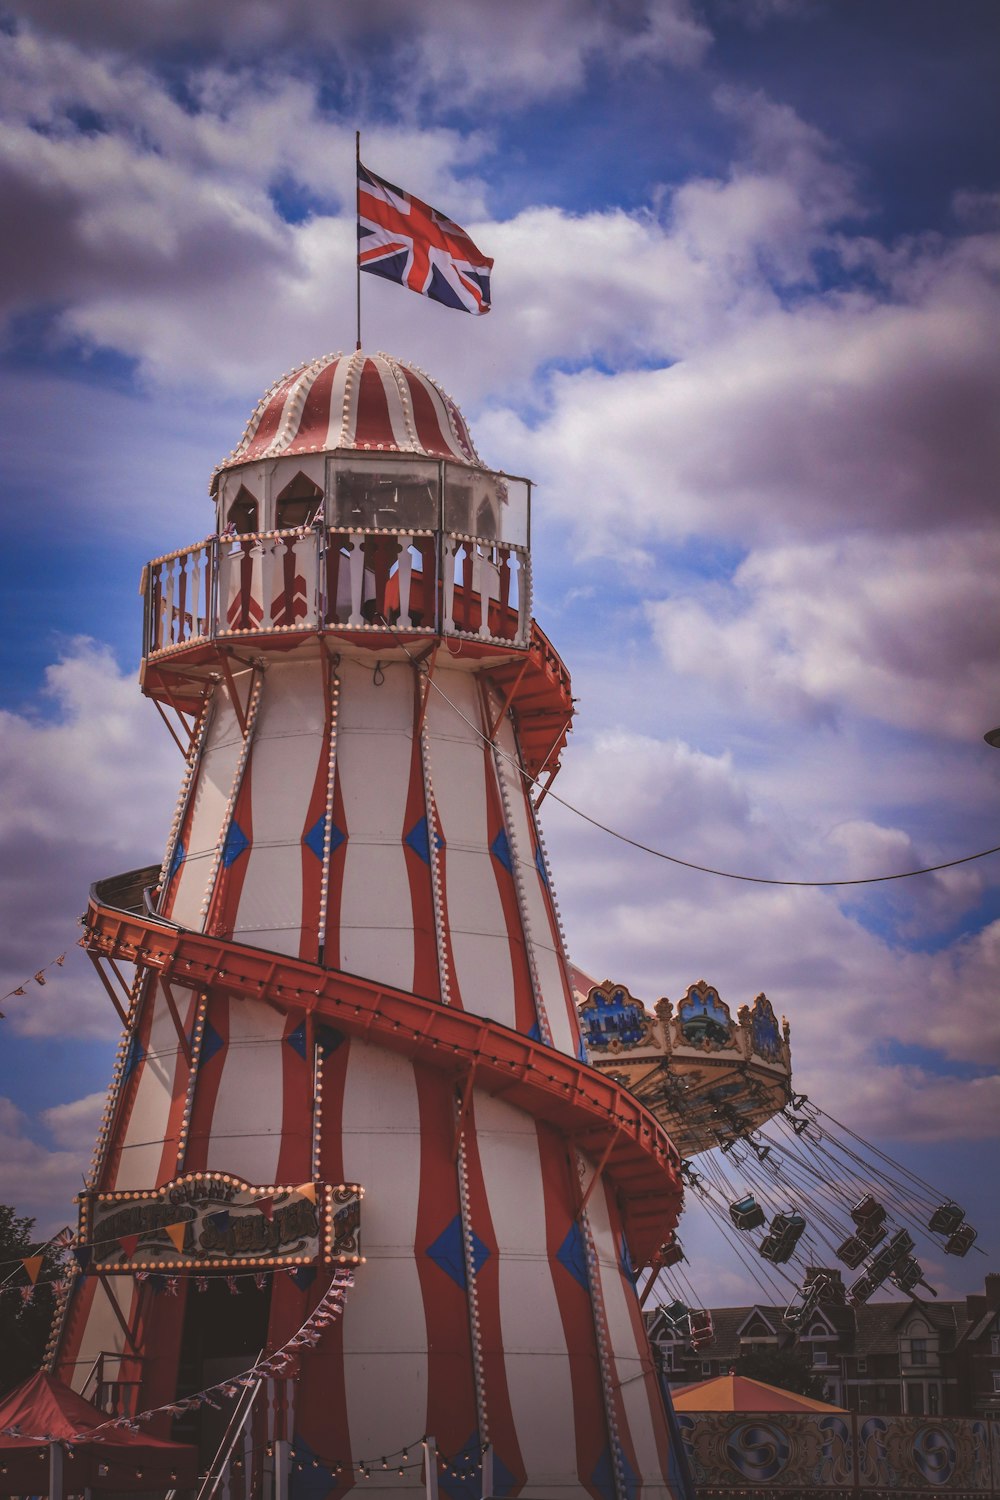 a red and white tower with a flag on top